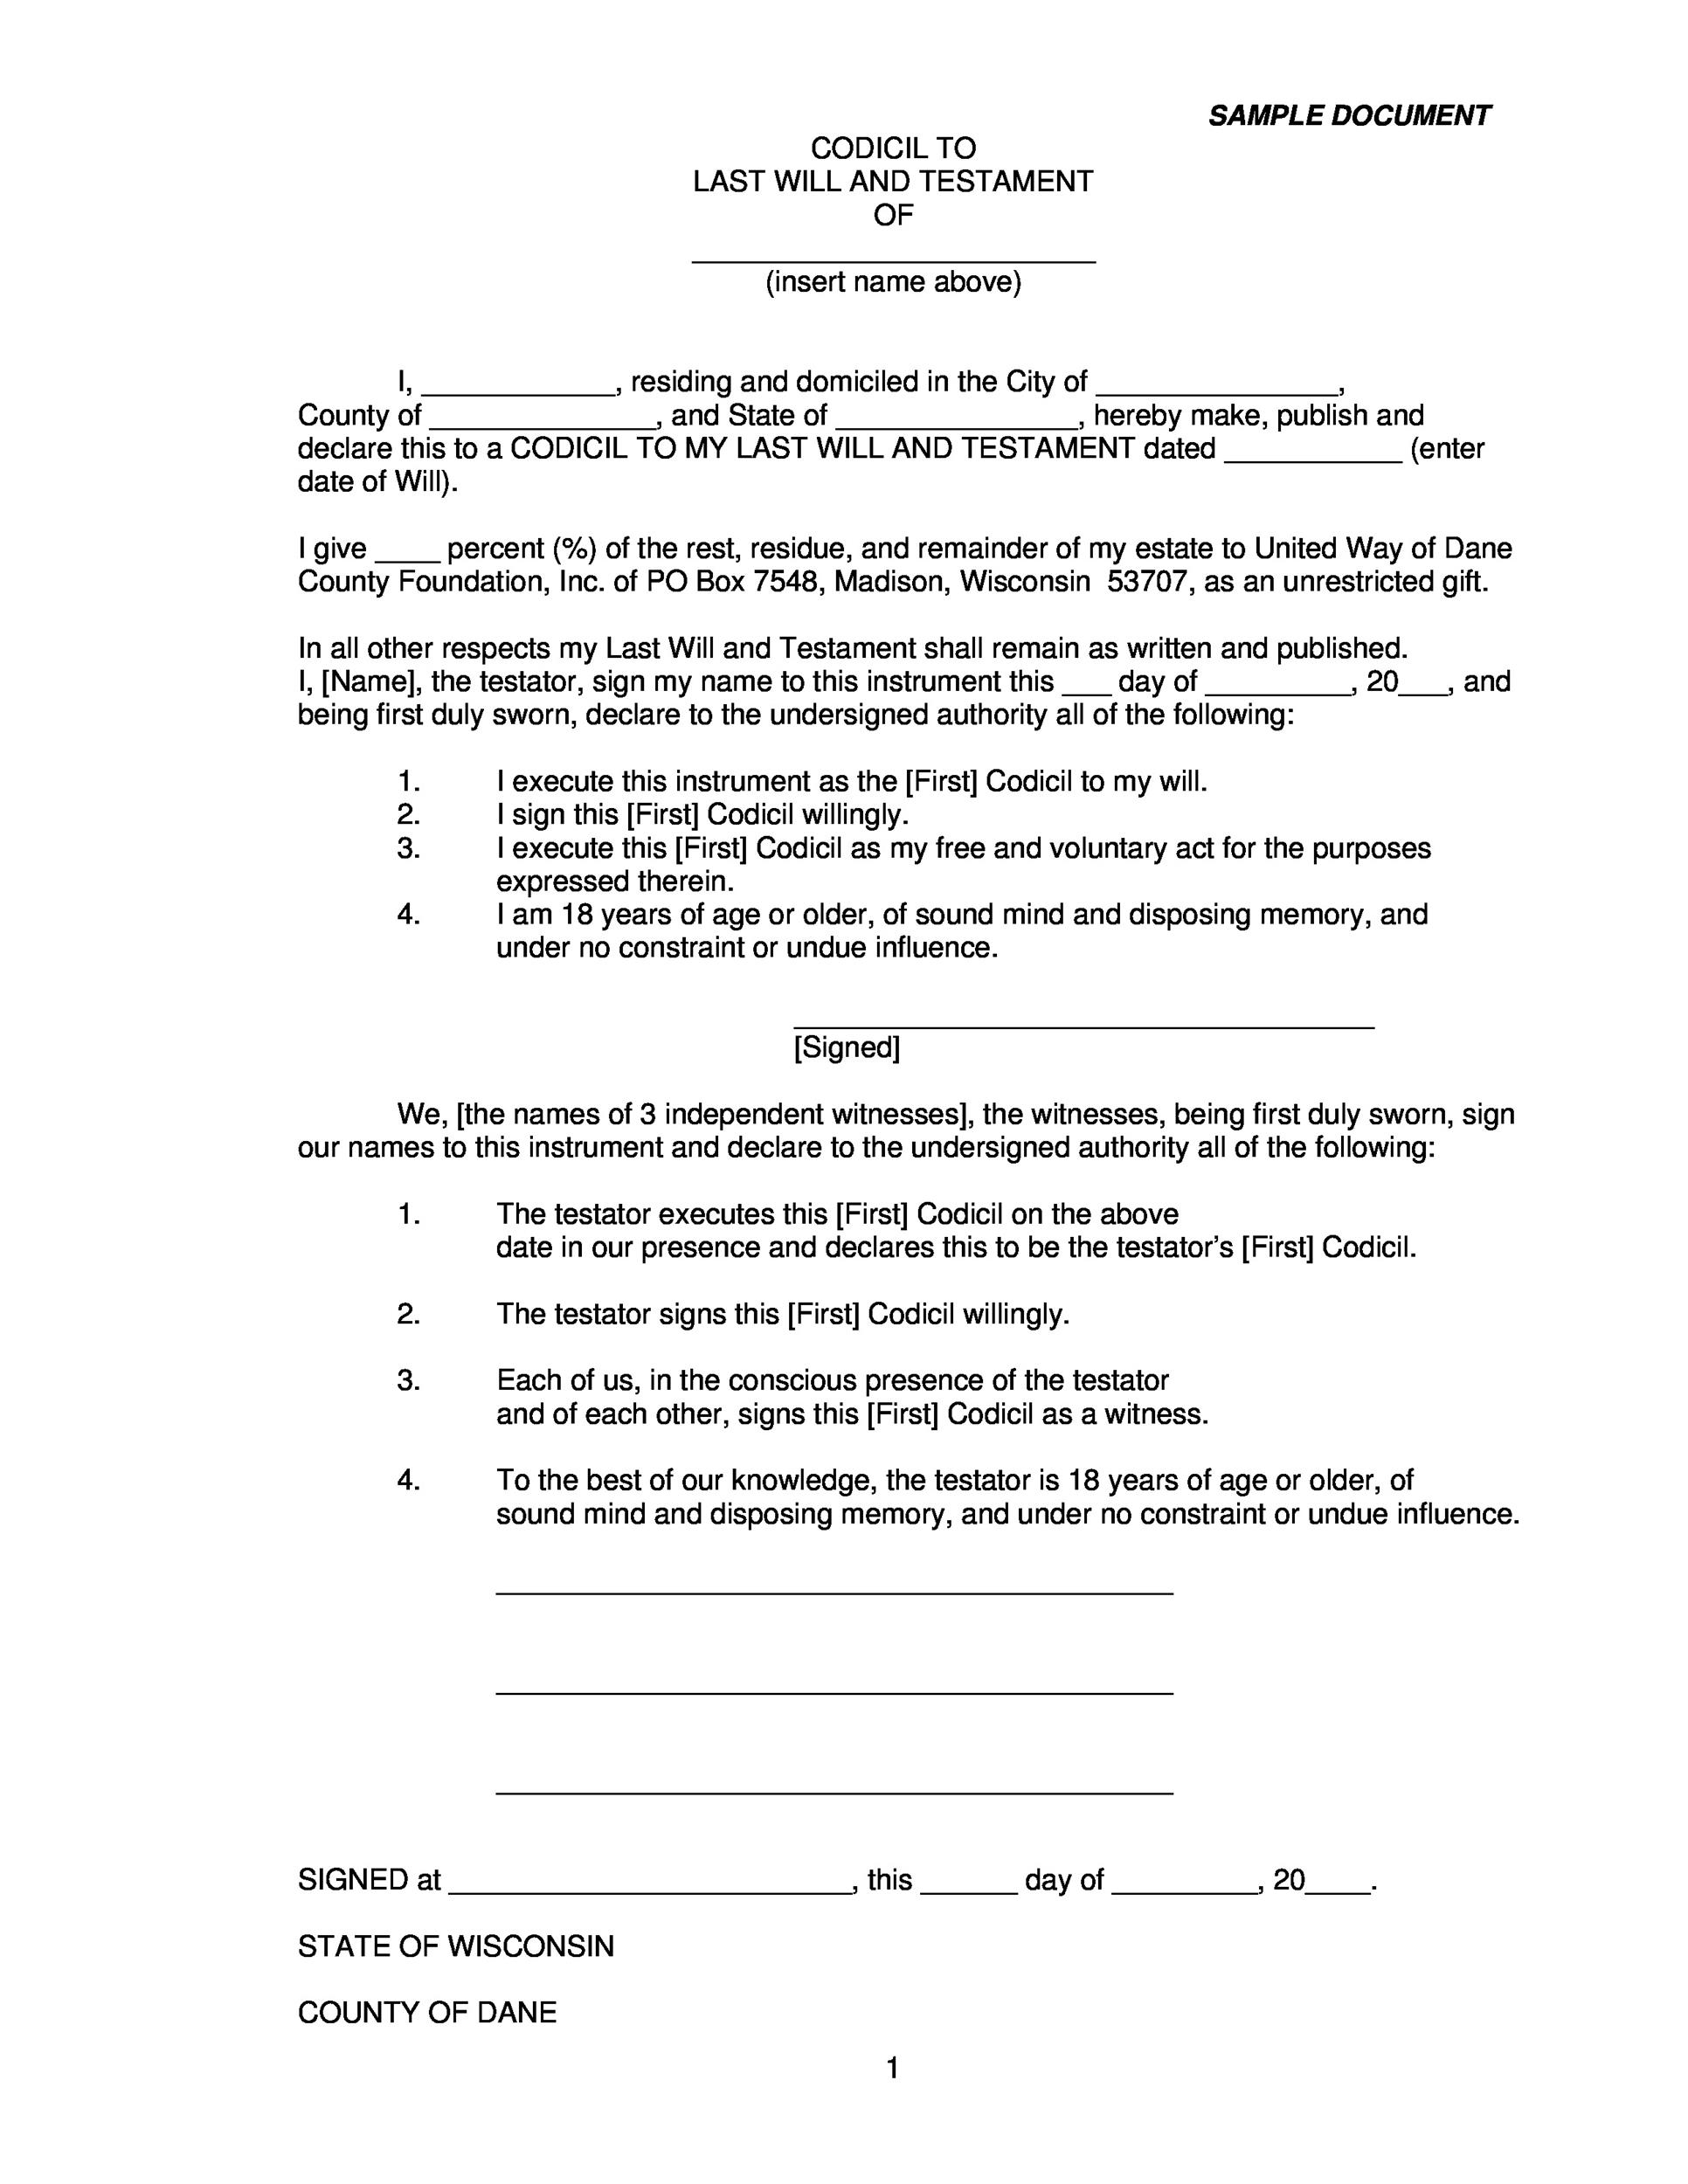 free-printable-last-will-and-testament-nj-tutore-org-master-of